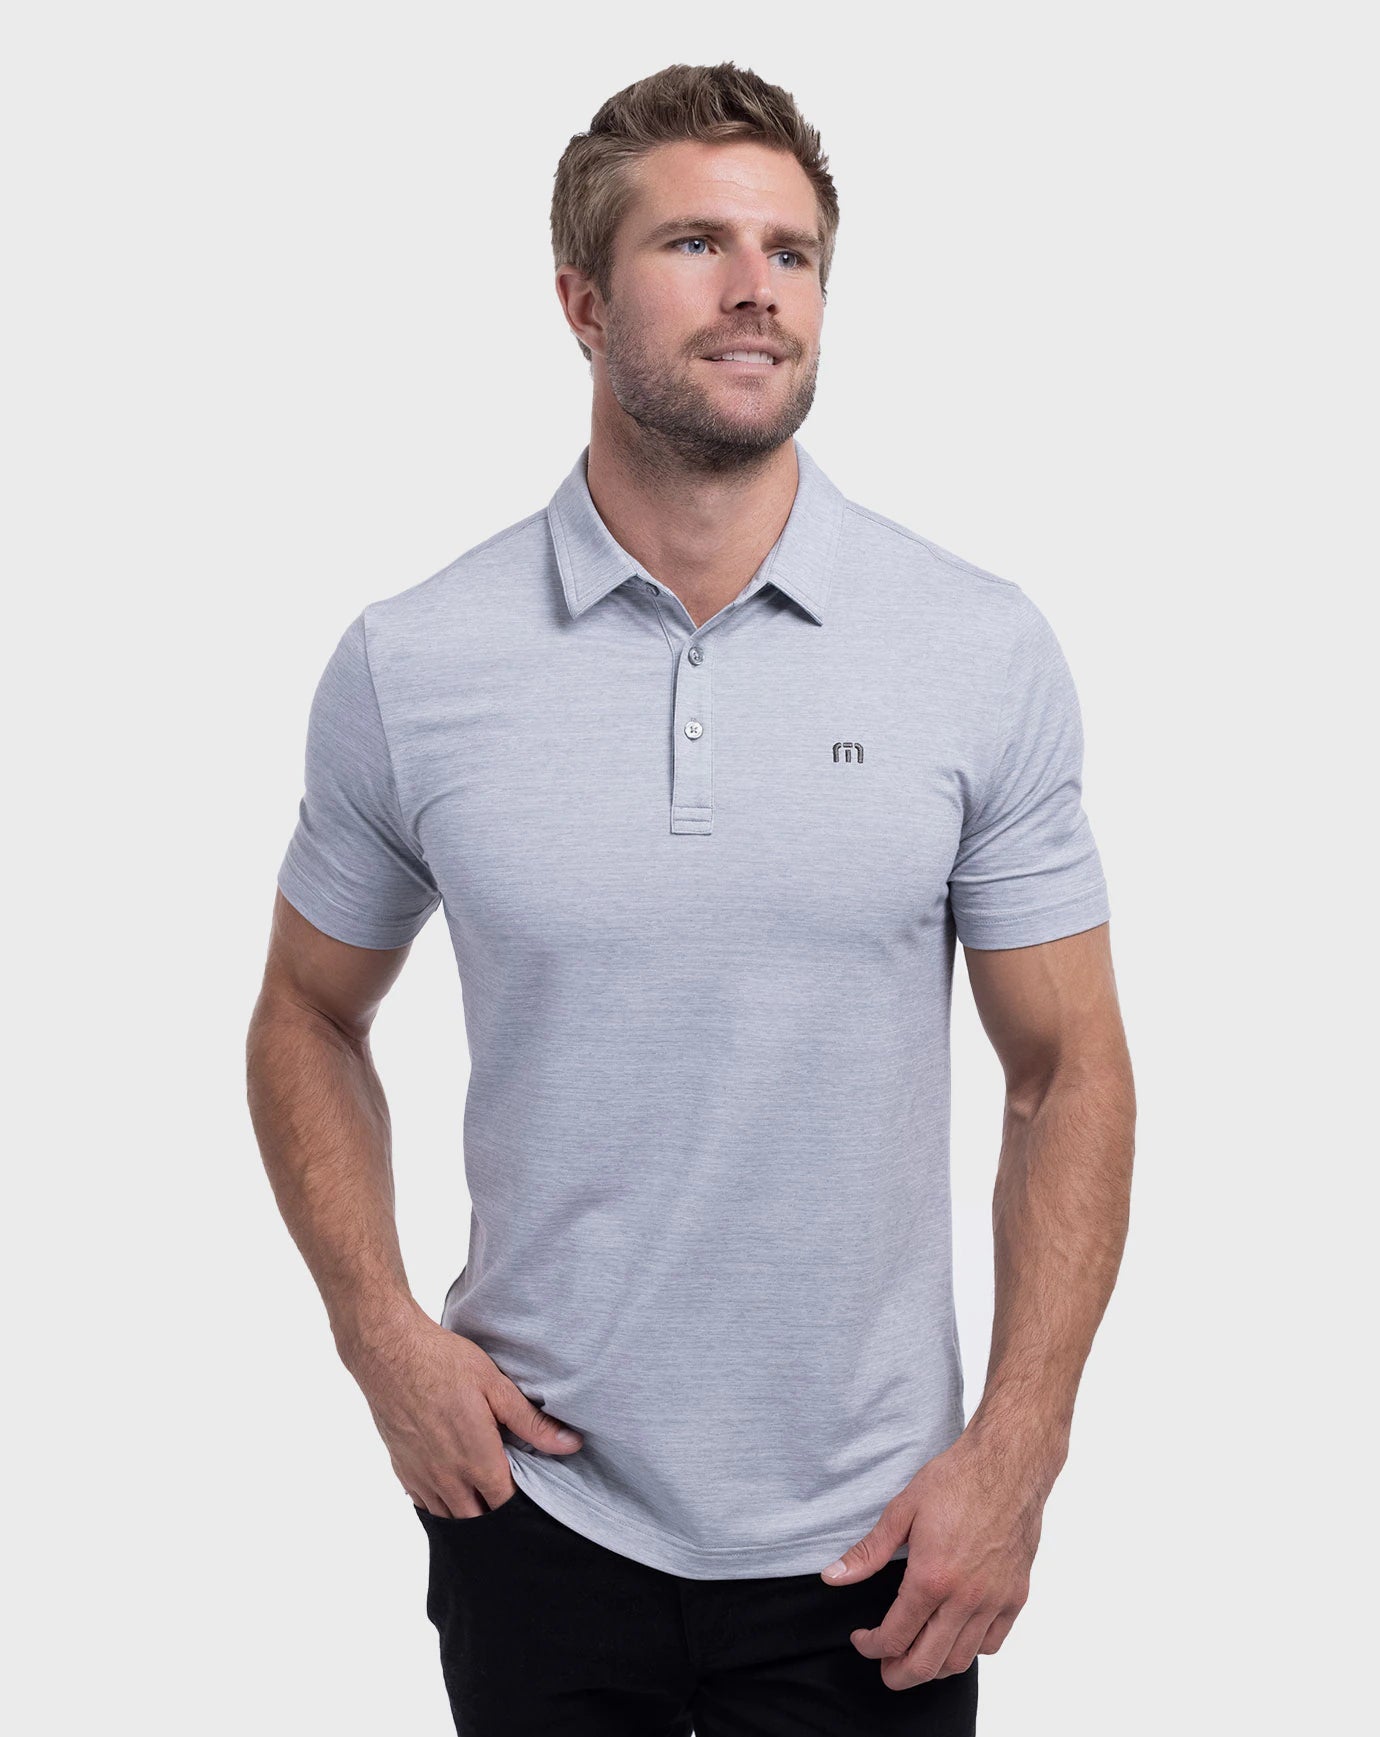 The Heater polo isn't just outfitted with performance elements, it's made from more sustainable fabrics from our Eco Collection. 